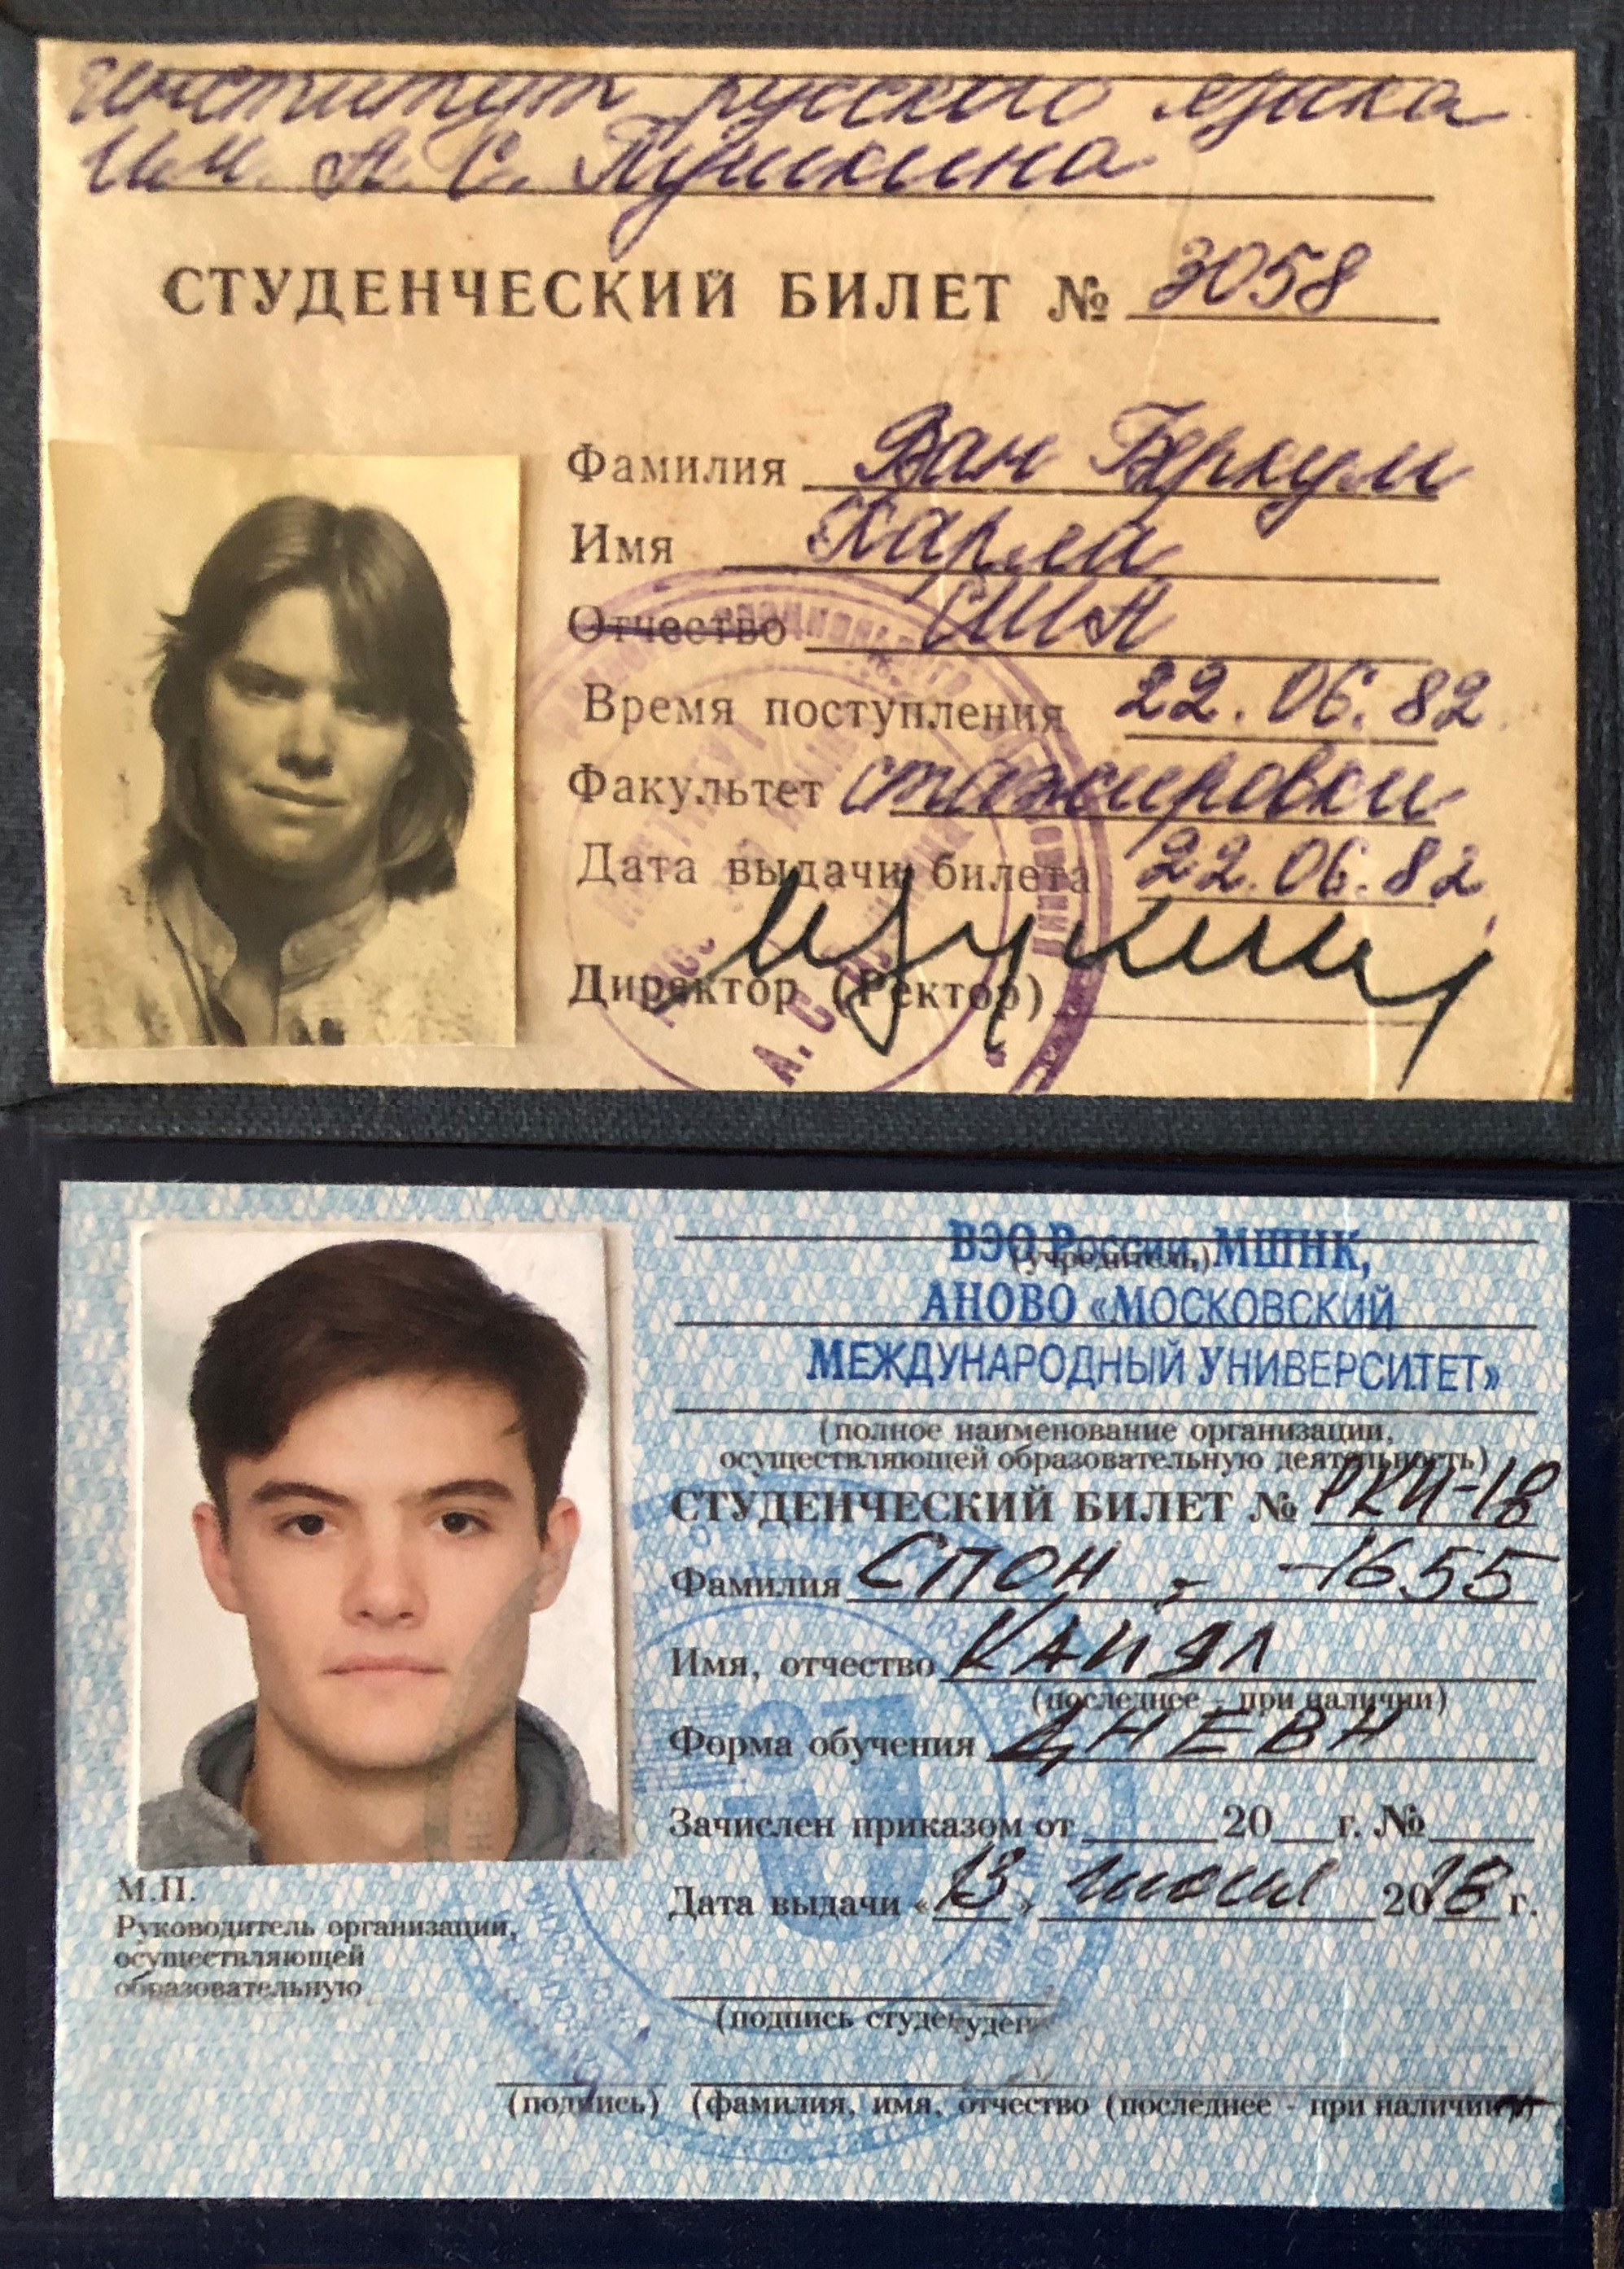 Two student IDs, issued 37 years apart. Carla's ID and Kyle's below it.